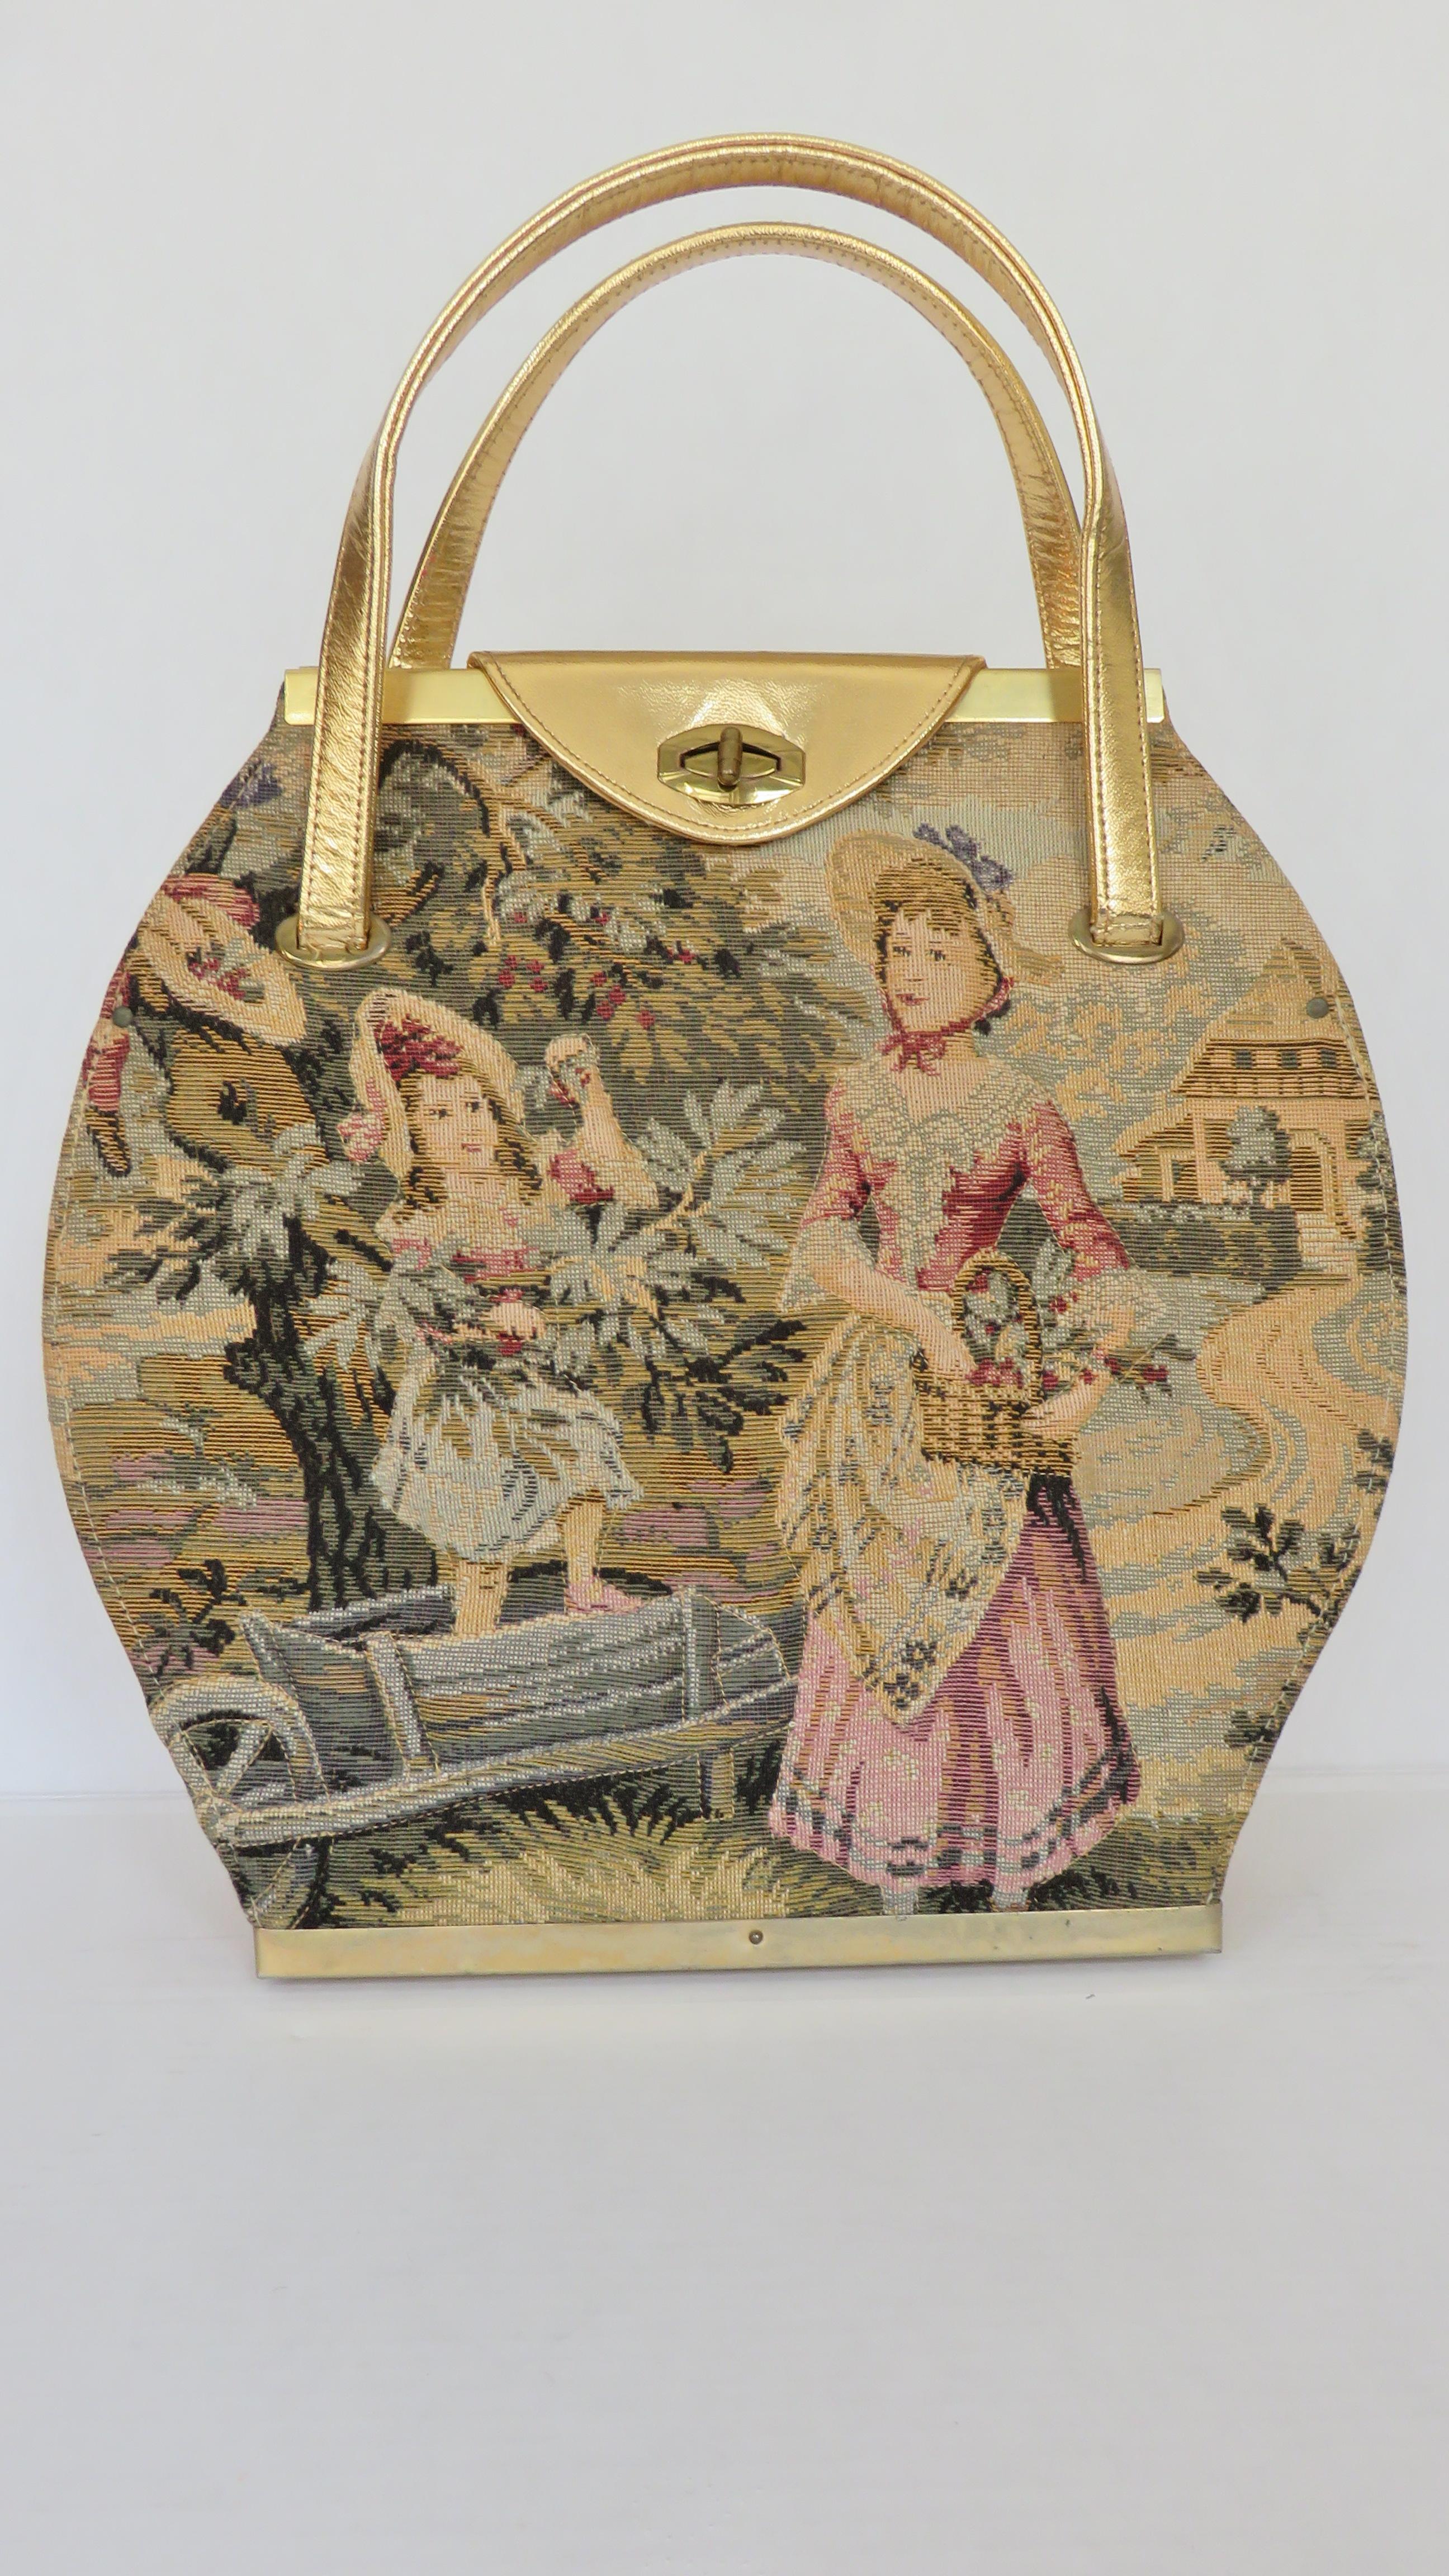 A unique rounded shape gold and tapestry handbag from Tyrolean.  It has double top handles and a gold turn lock closure on a gold flap. The top and bottom are framed in gold metal.  The front is an 18th century tapestry scene of a woman and child